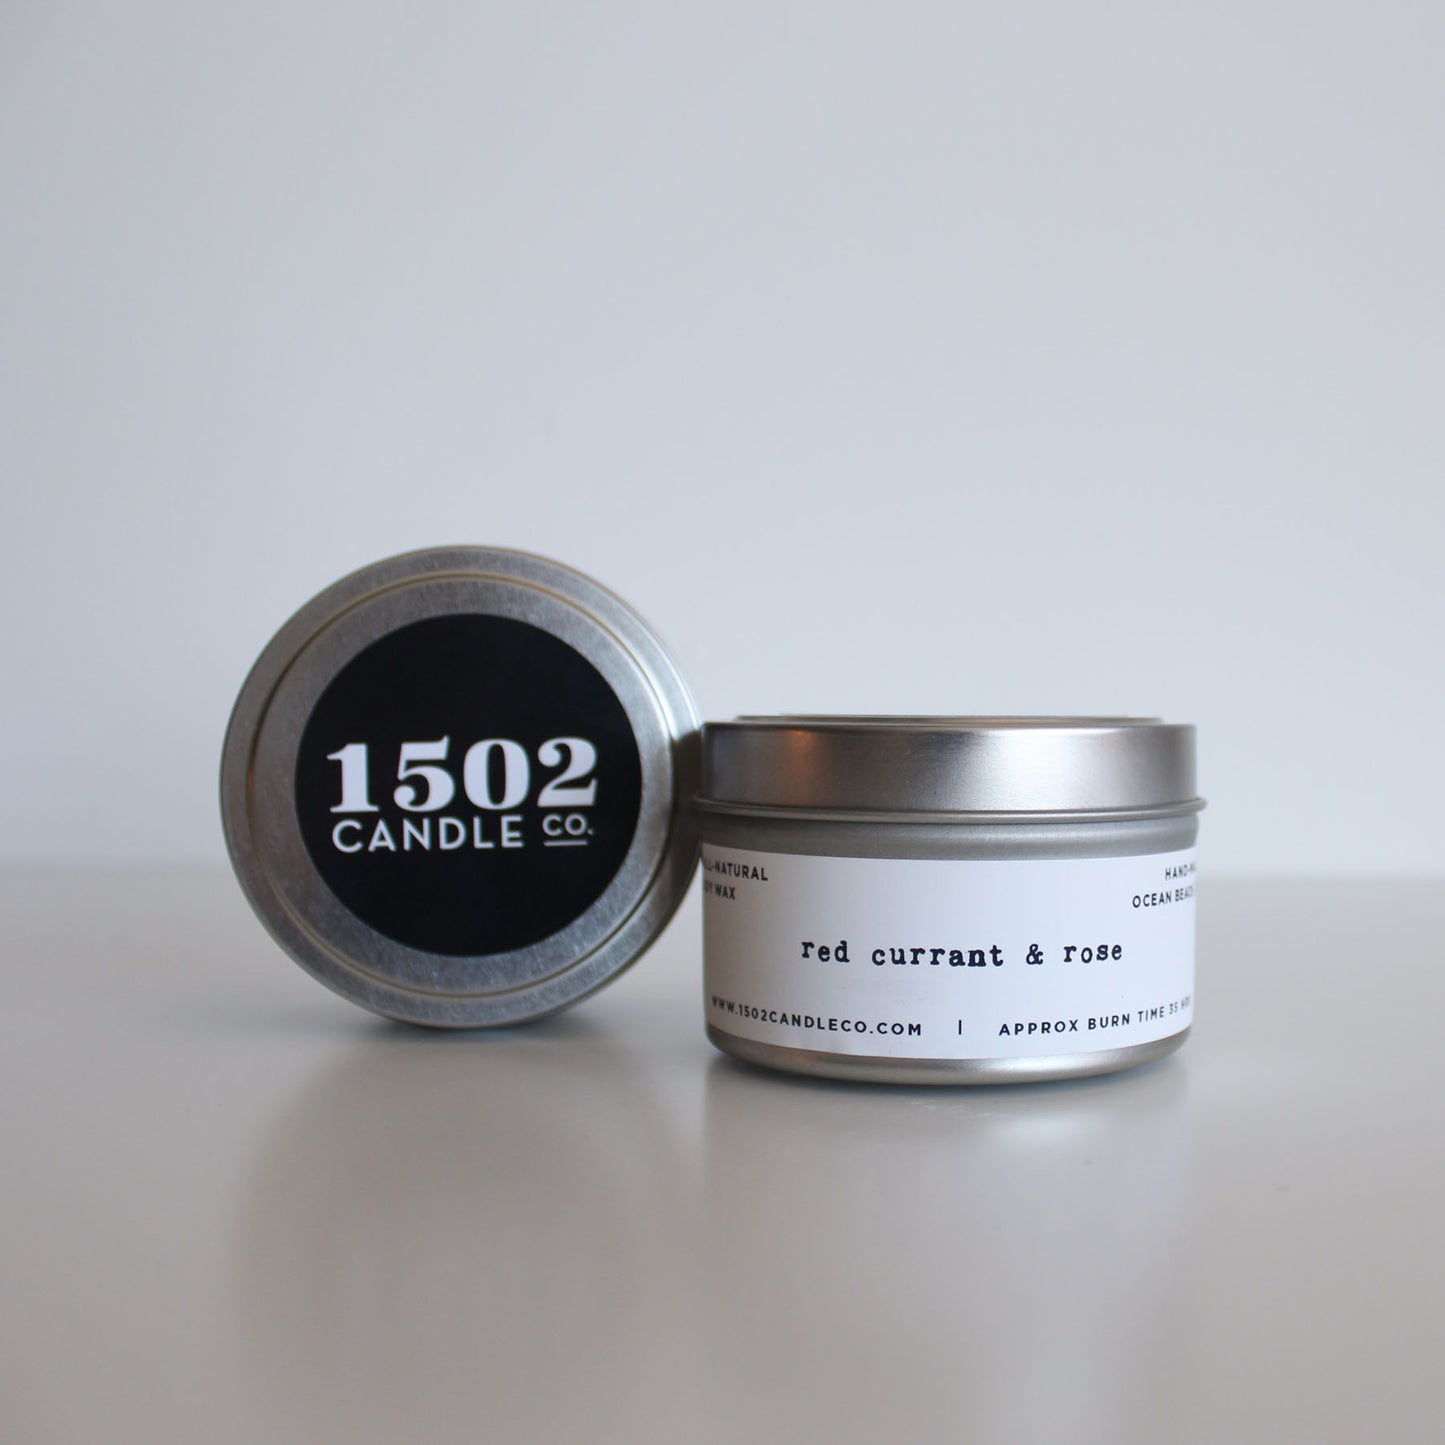 1502 Candle Co. | Red Currant & Rose Soy Candle - Travel Tin